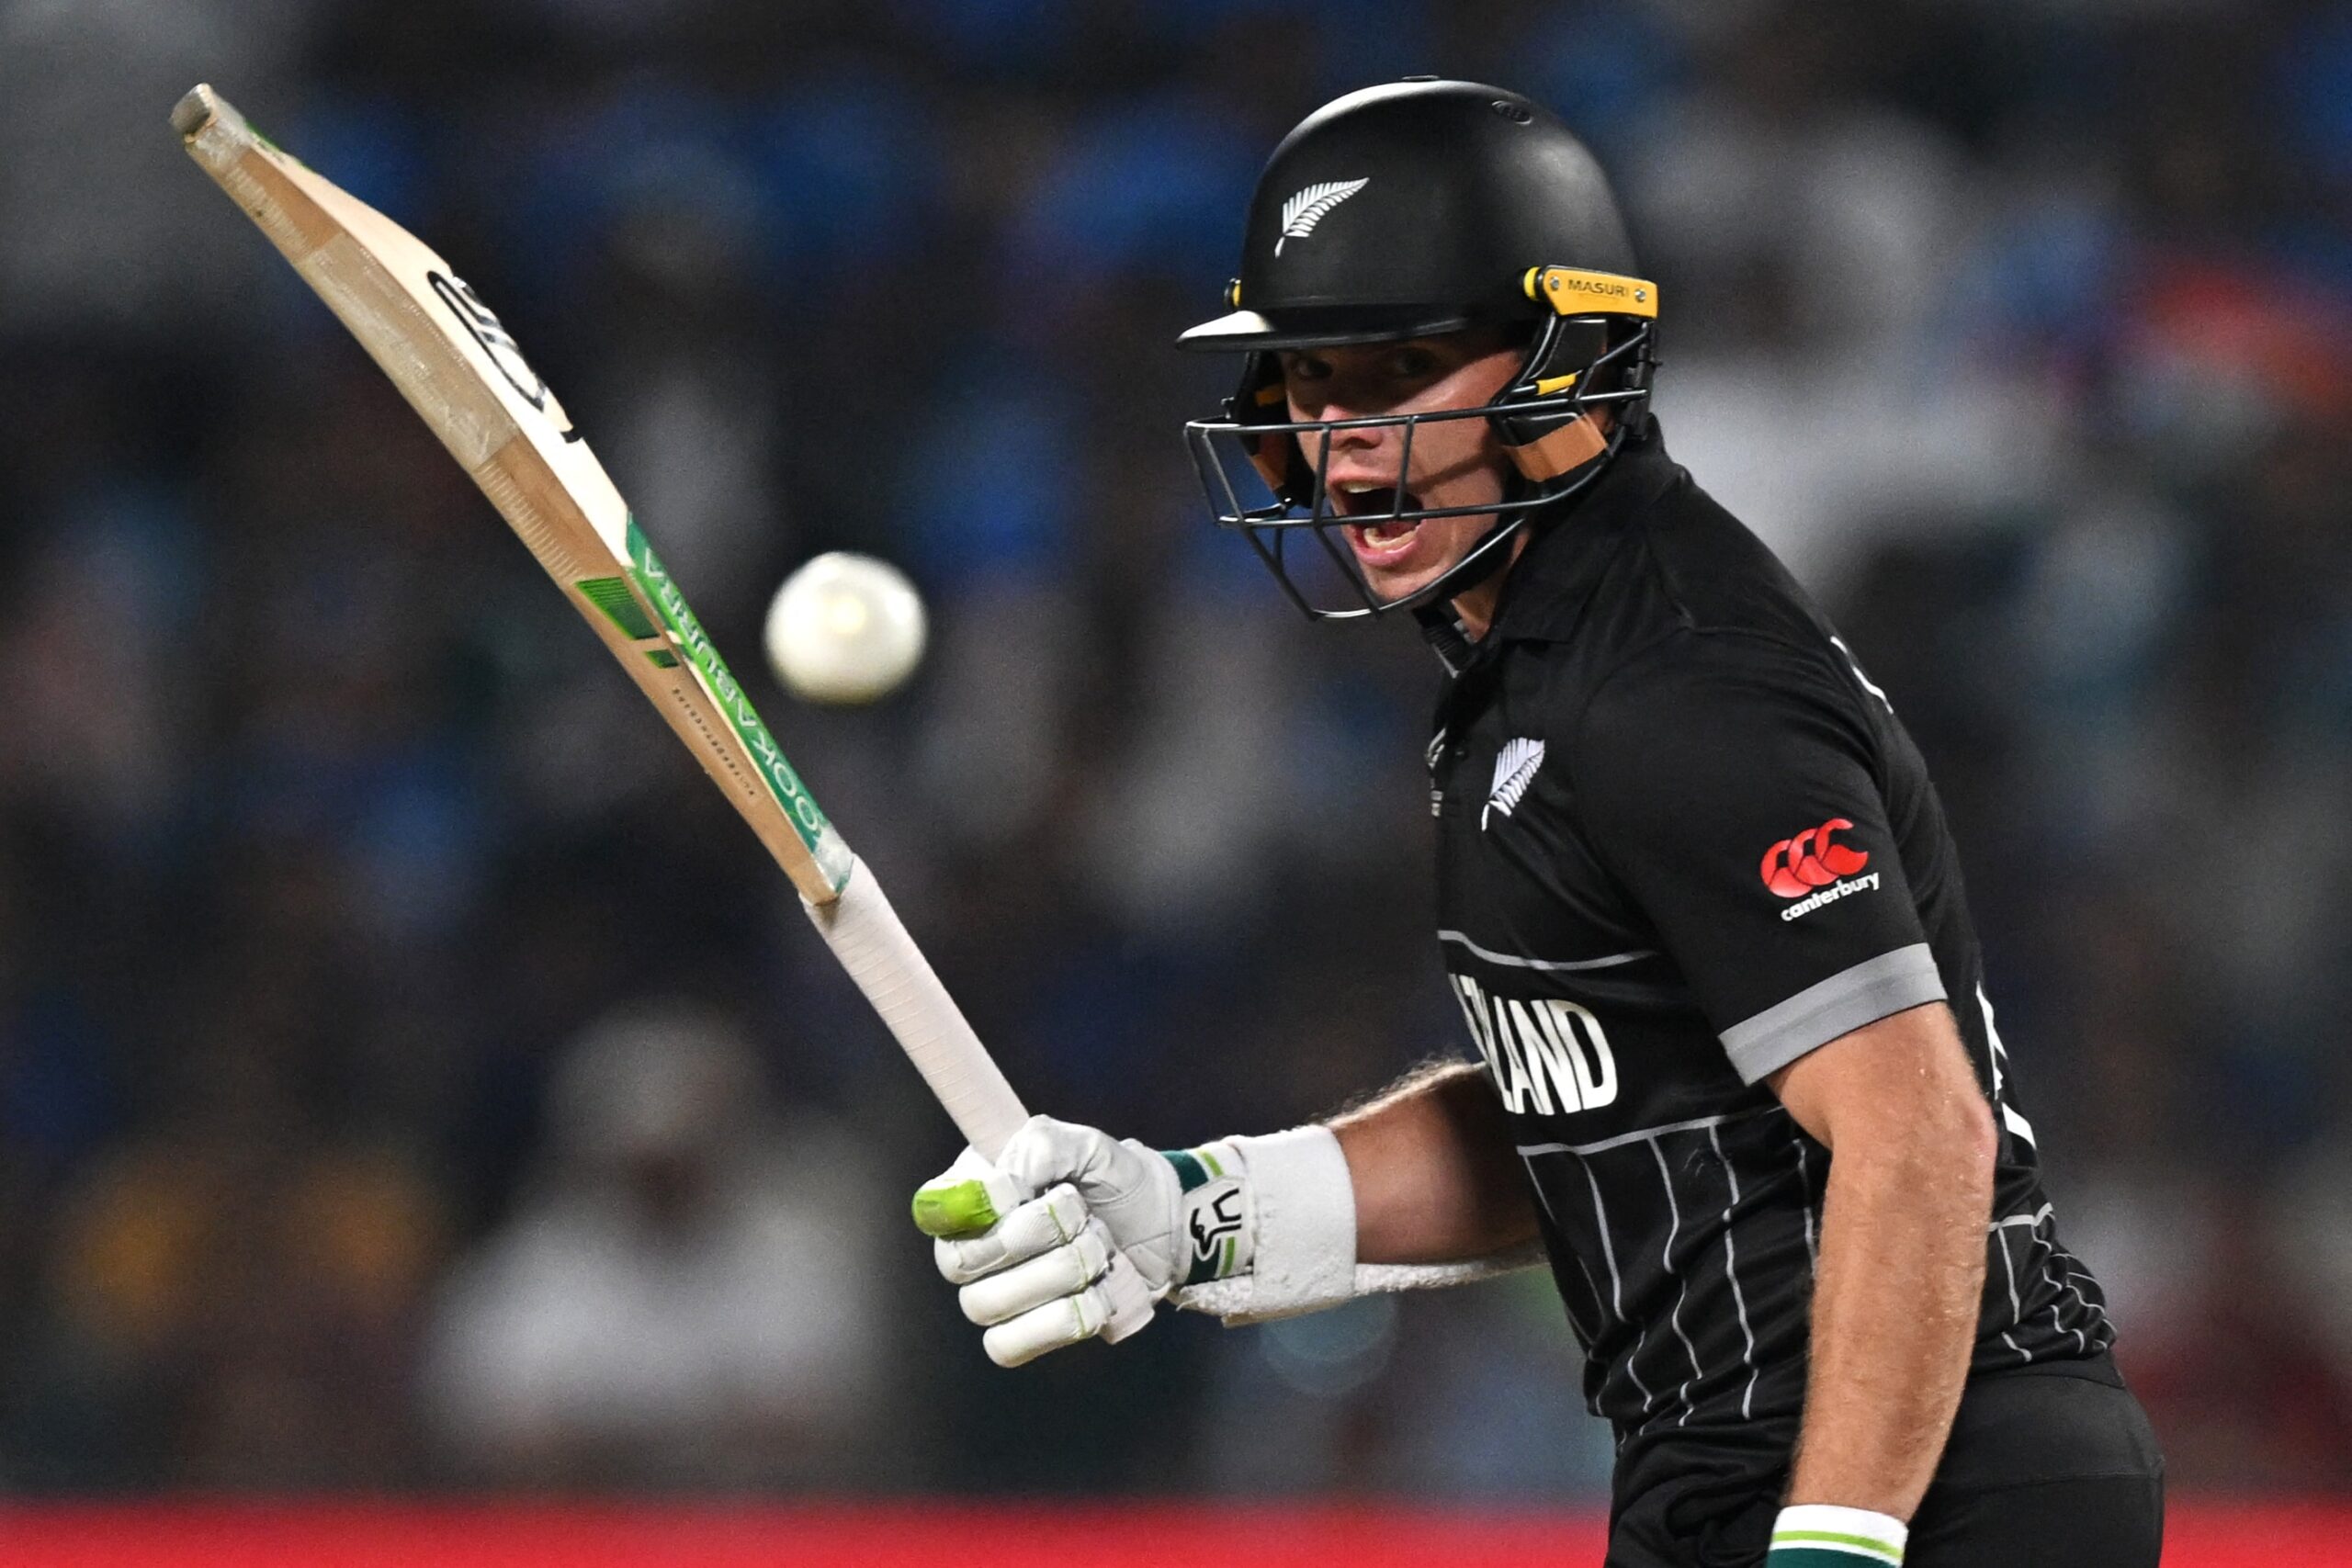 “Have Faced Adversities With Injuries”: New Zealand Skipper Tom Latham After Loss vs South Africa